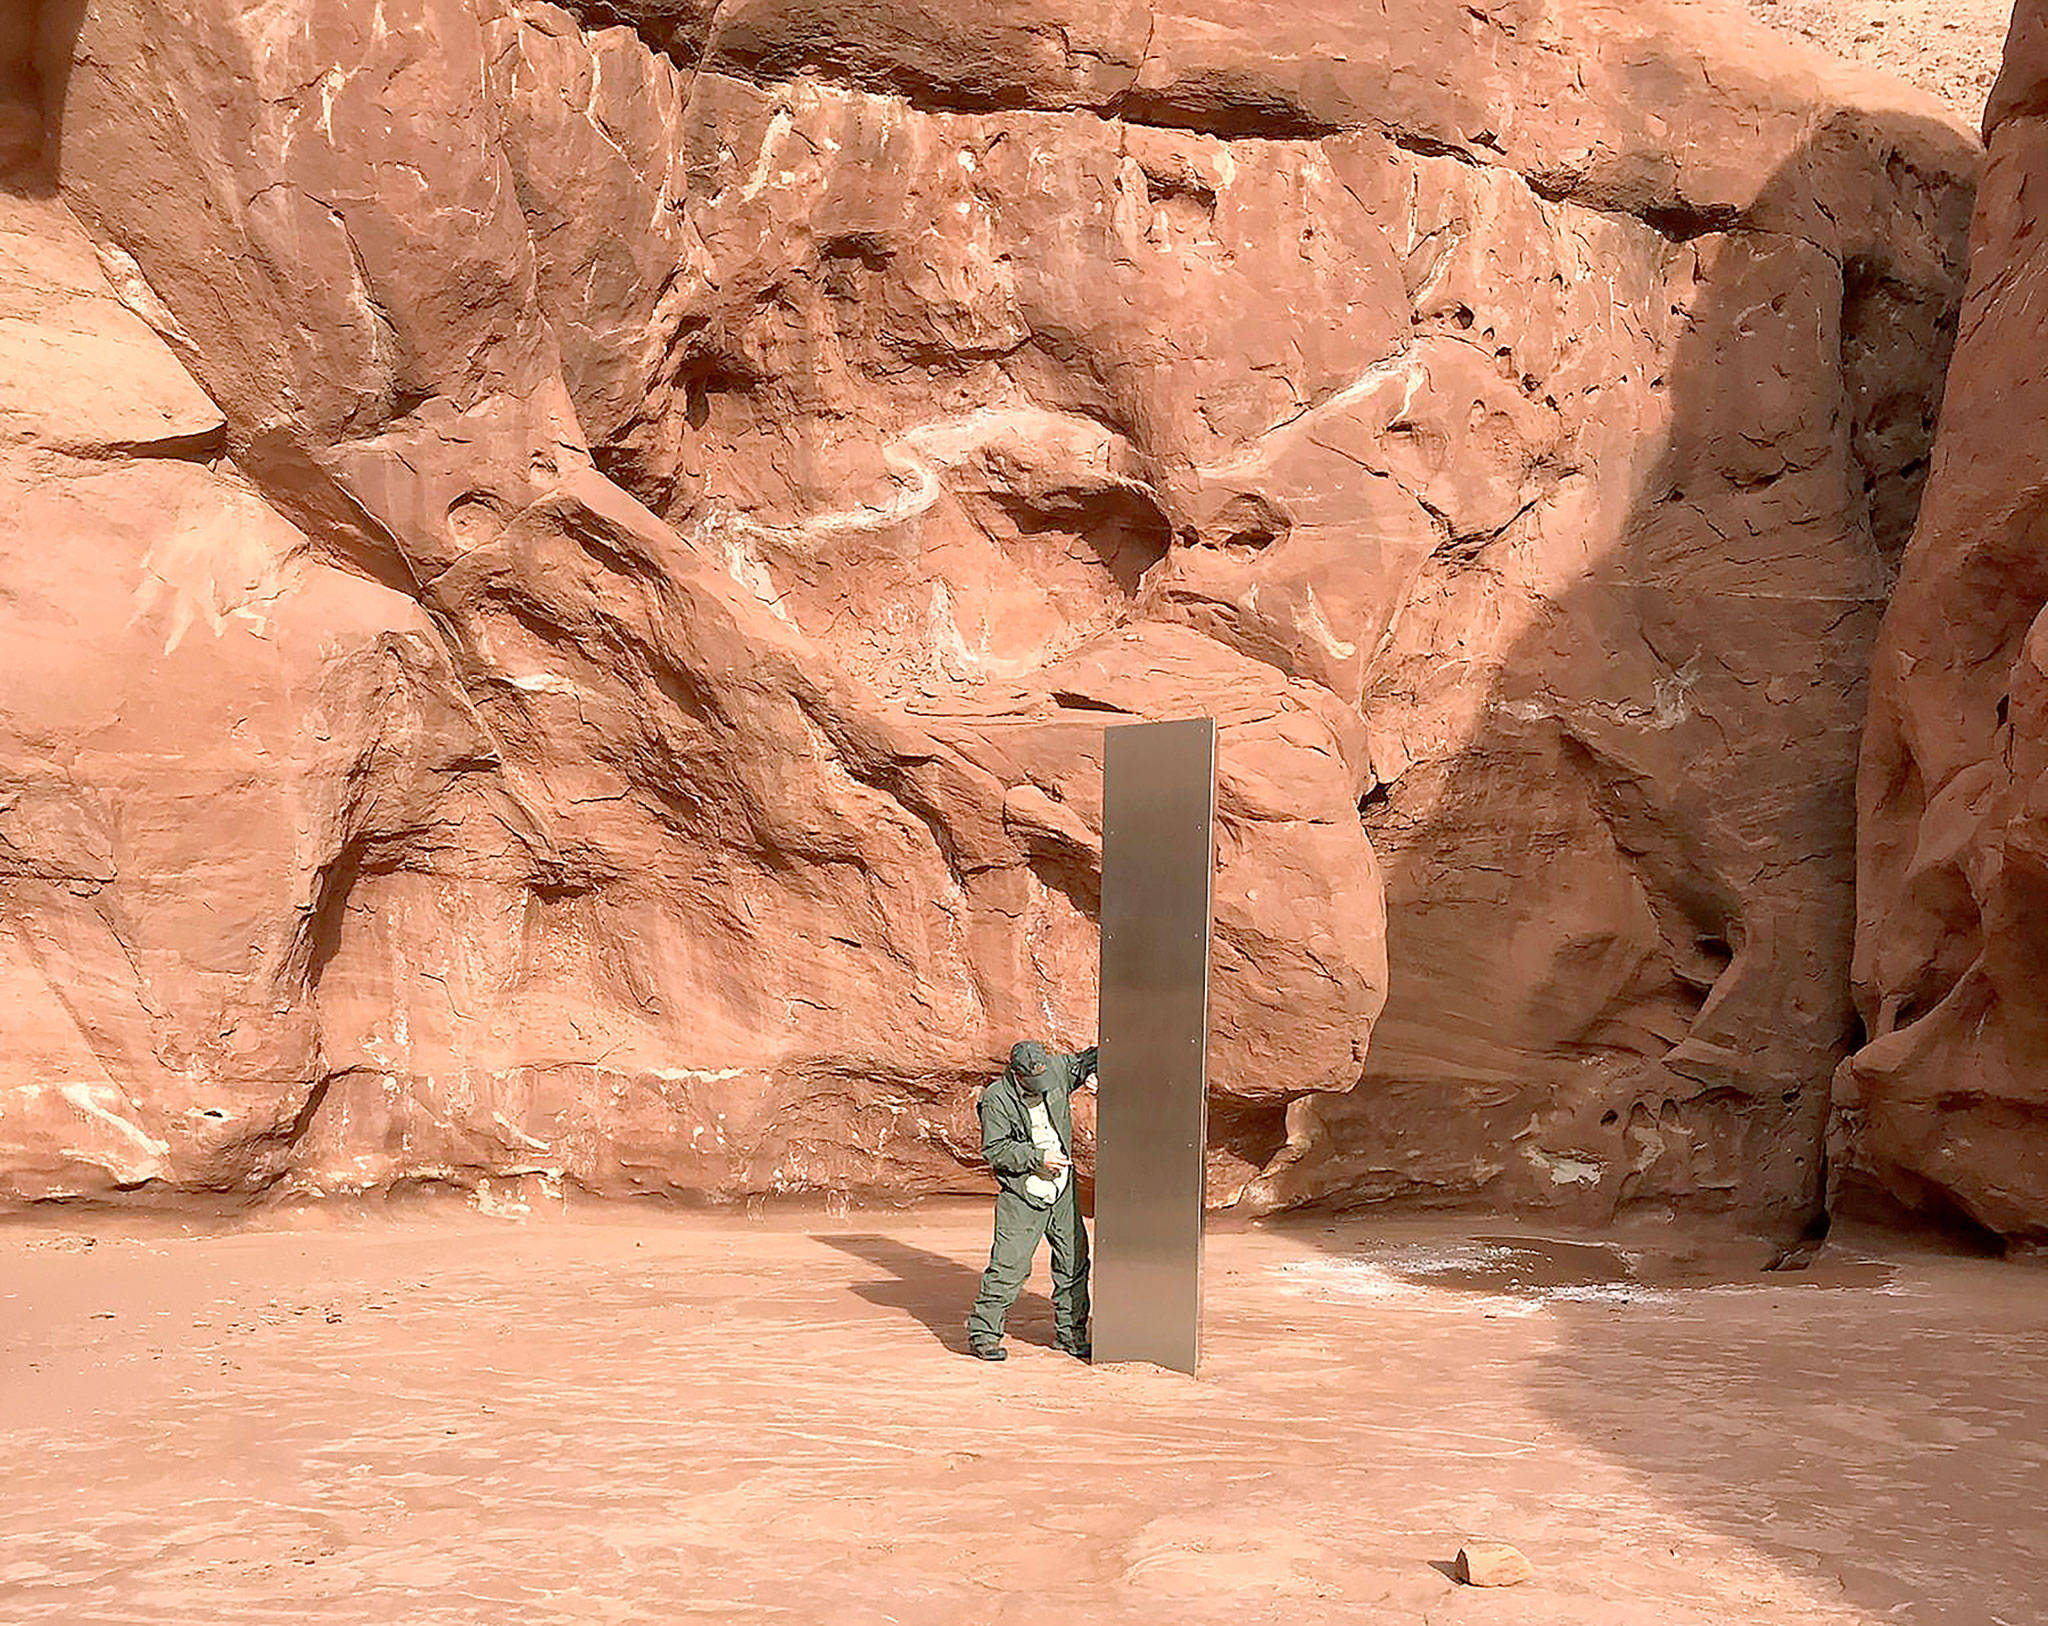 A Utah state worker stands next to a metal monolith in the ground in a remote area of red rock Nov. 18 in Utah. The mysterious silver monolith found in the Utah desert has disappeared less than 10 days after it was spotted by wildlife biologists performing a helicopter survey of bighorn sheep, federal officials and witnesses said. (Utah Department of Public Safety via AP, File)